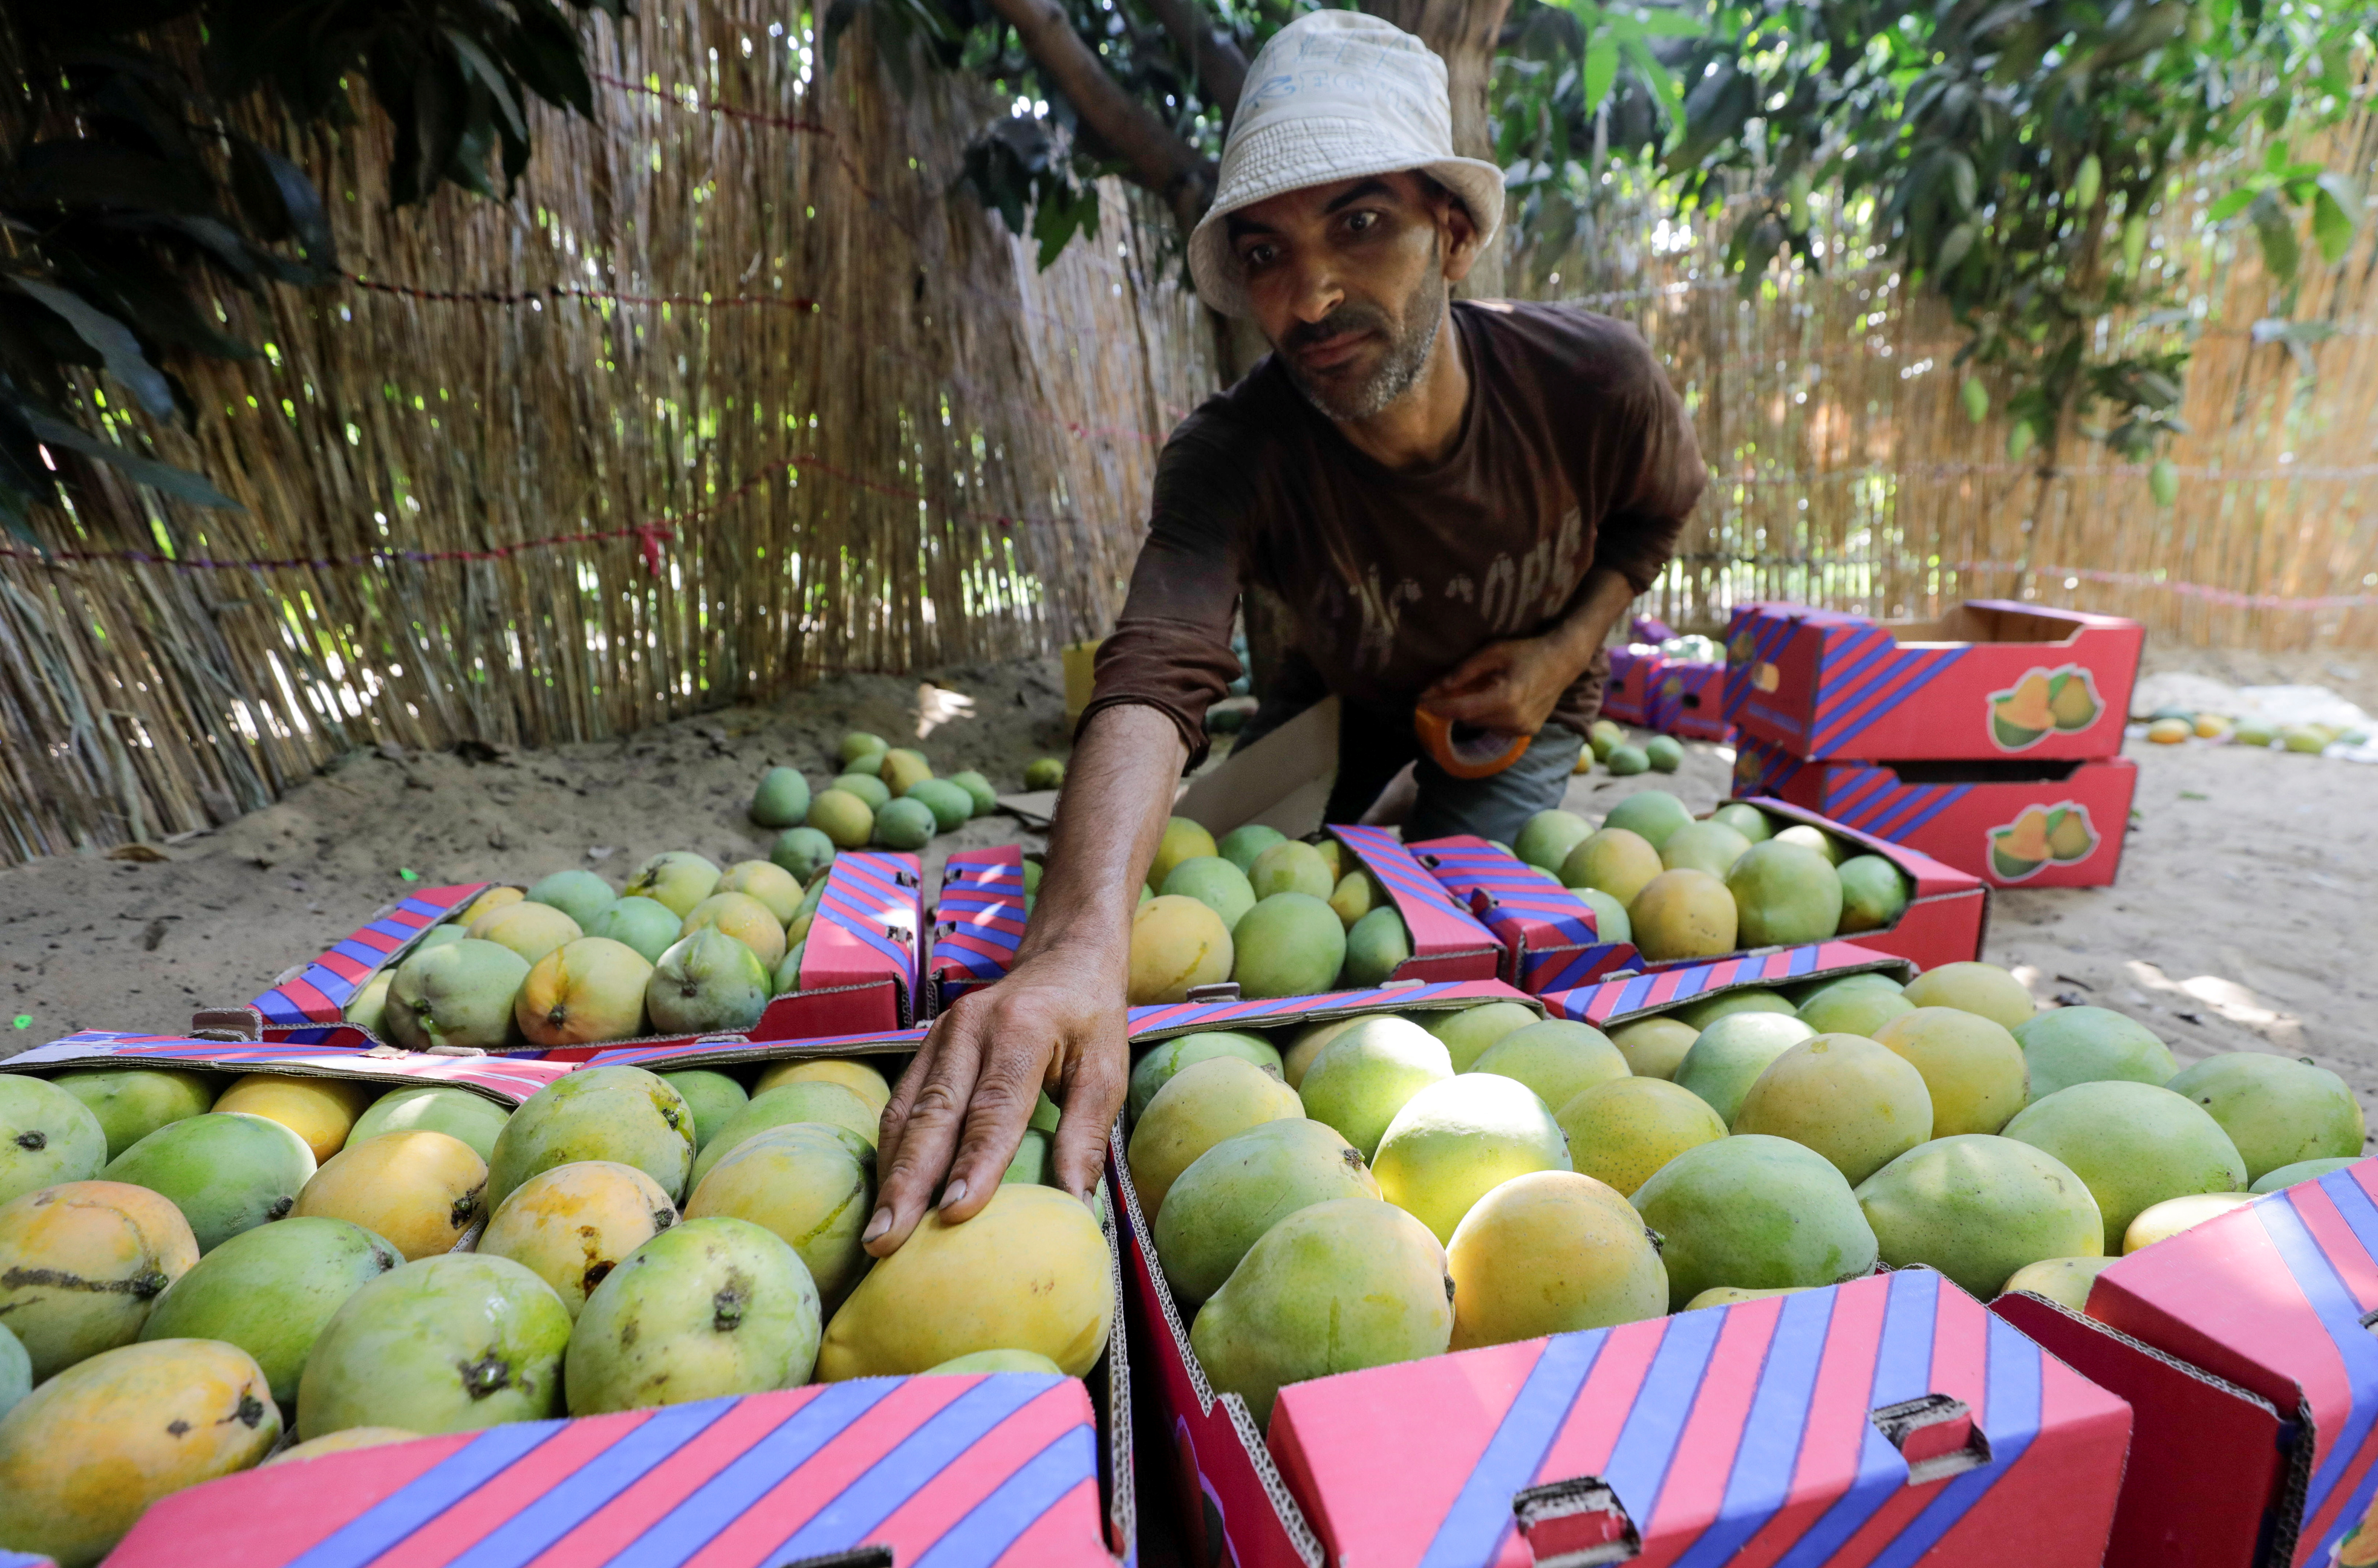 A farmer arranges mangoes after the yield dropped due to fungus linked to global warming, in Ismailia, Egypt, July 26, 2021. REUTERS/Mohamed Abd El Ghany